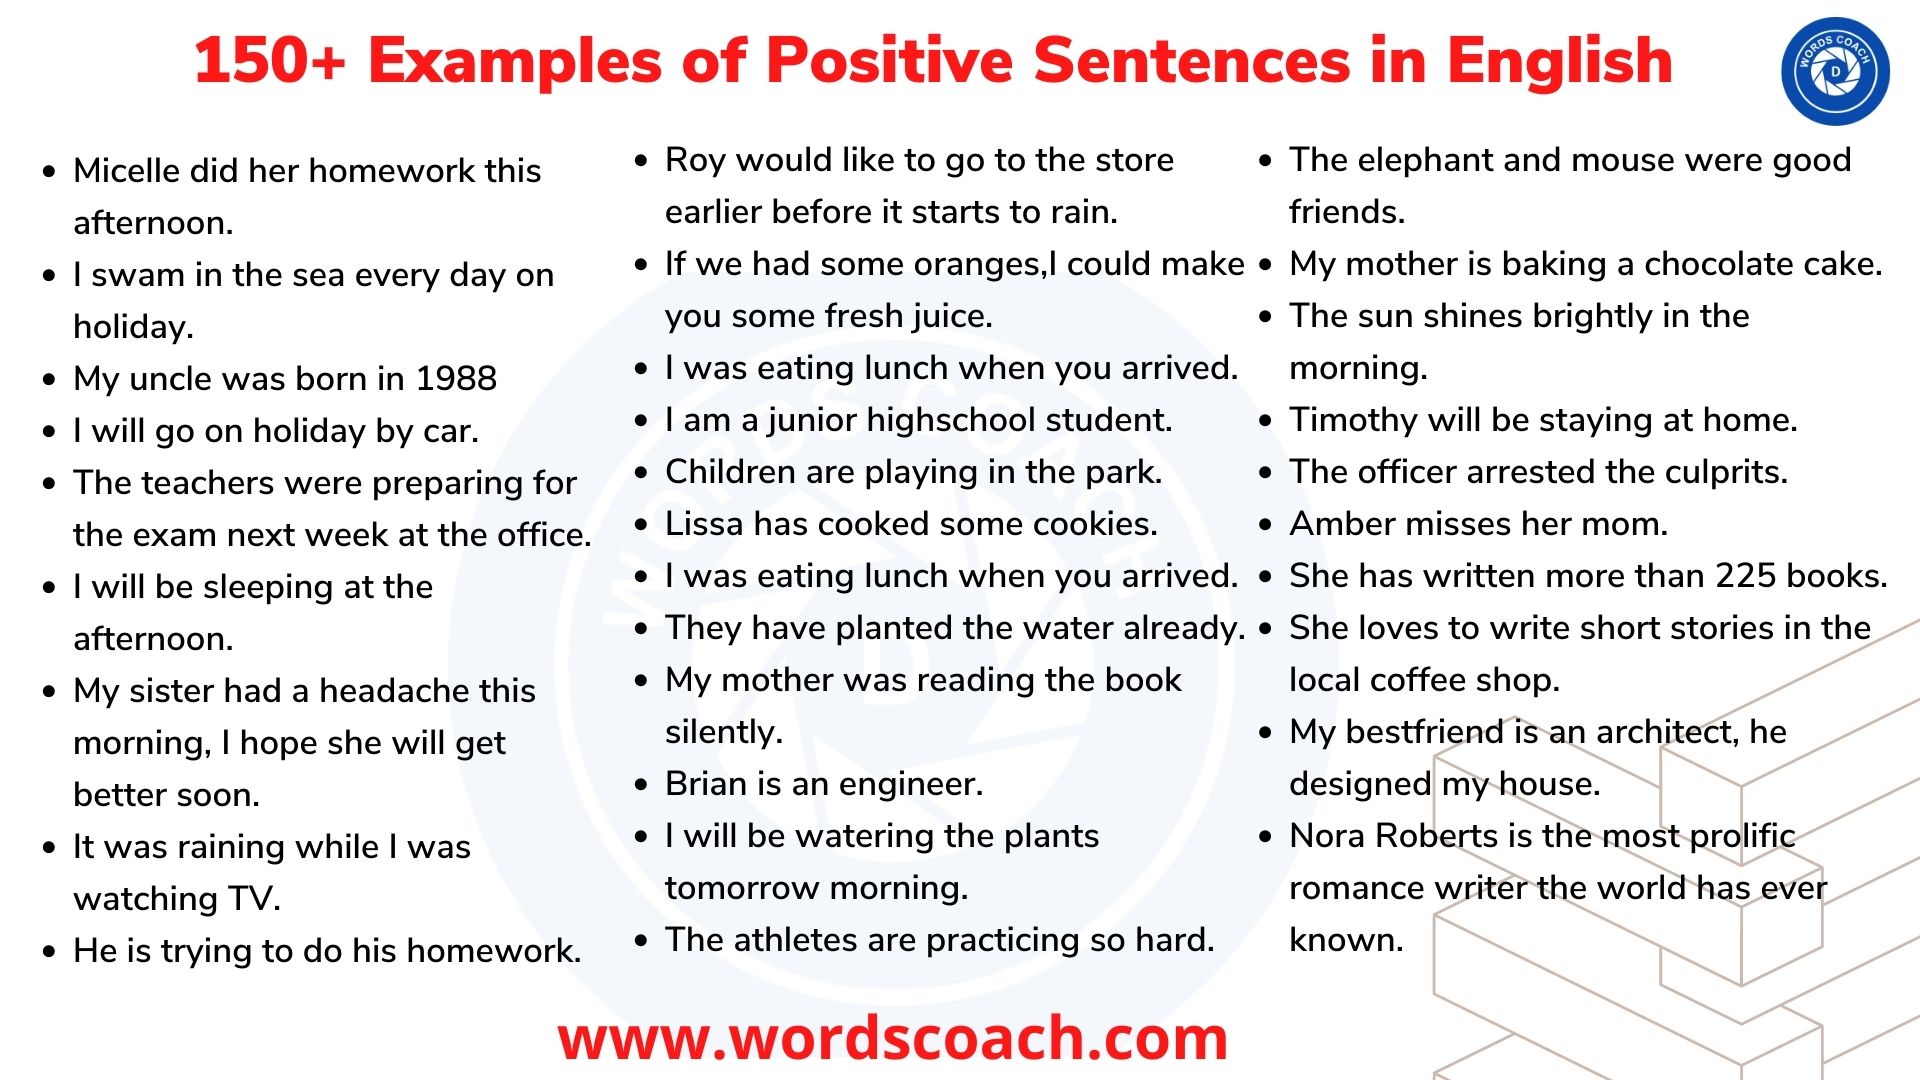 150+ Examples of Positive Sentences in English